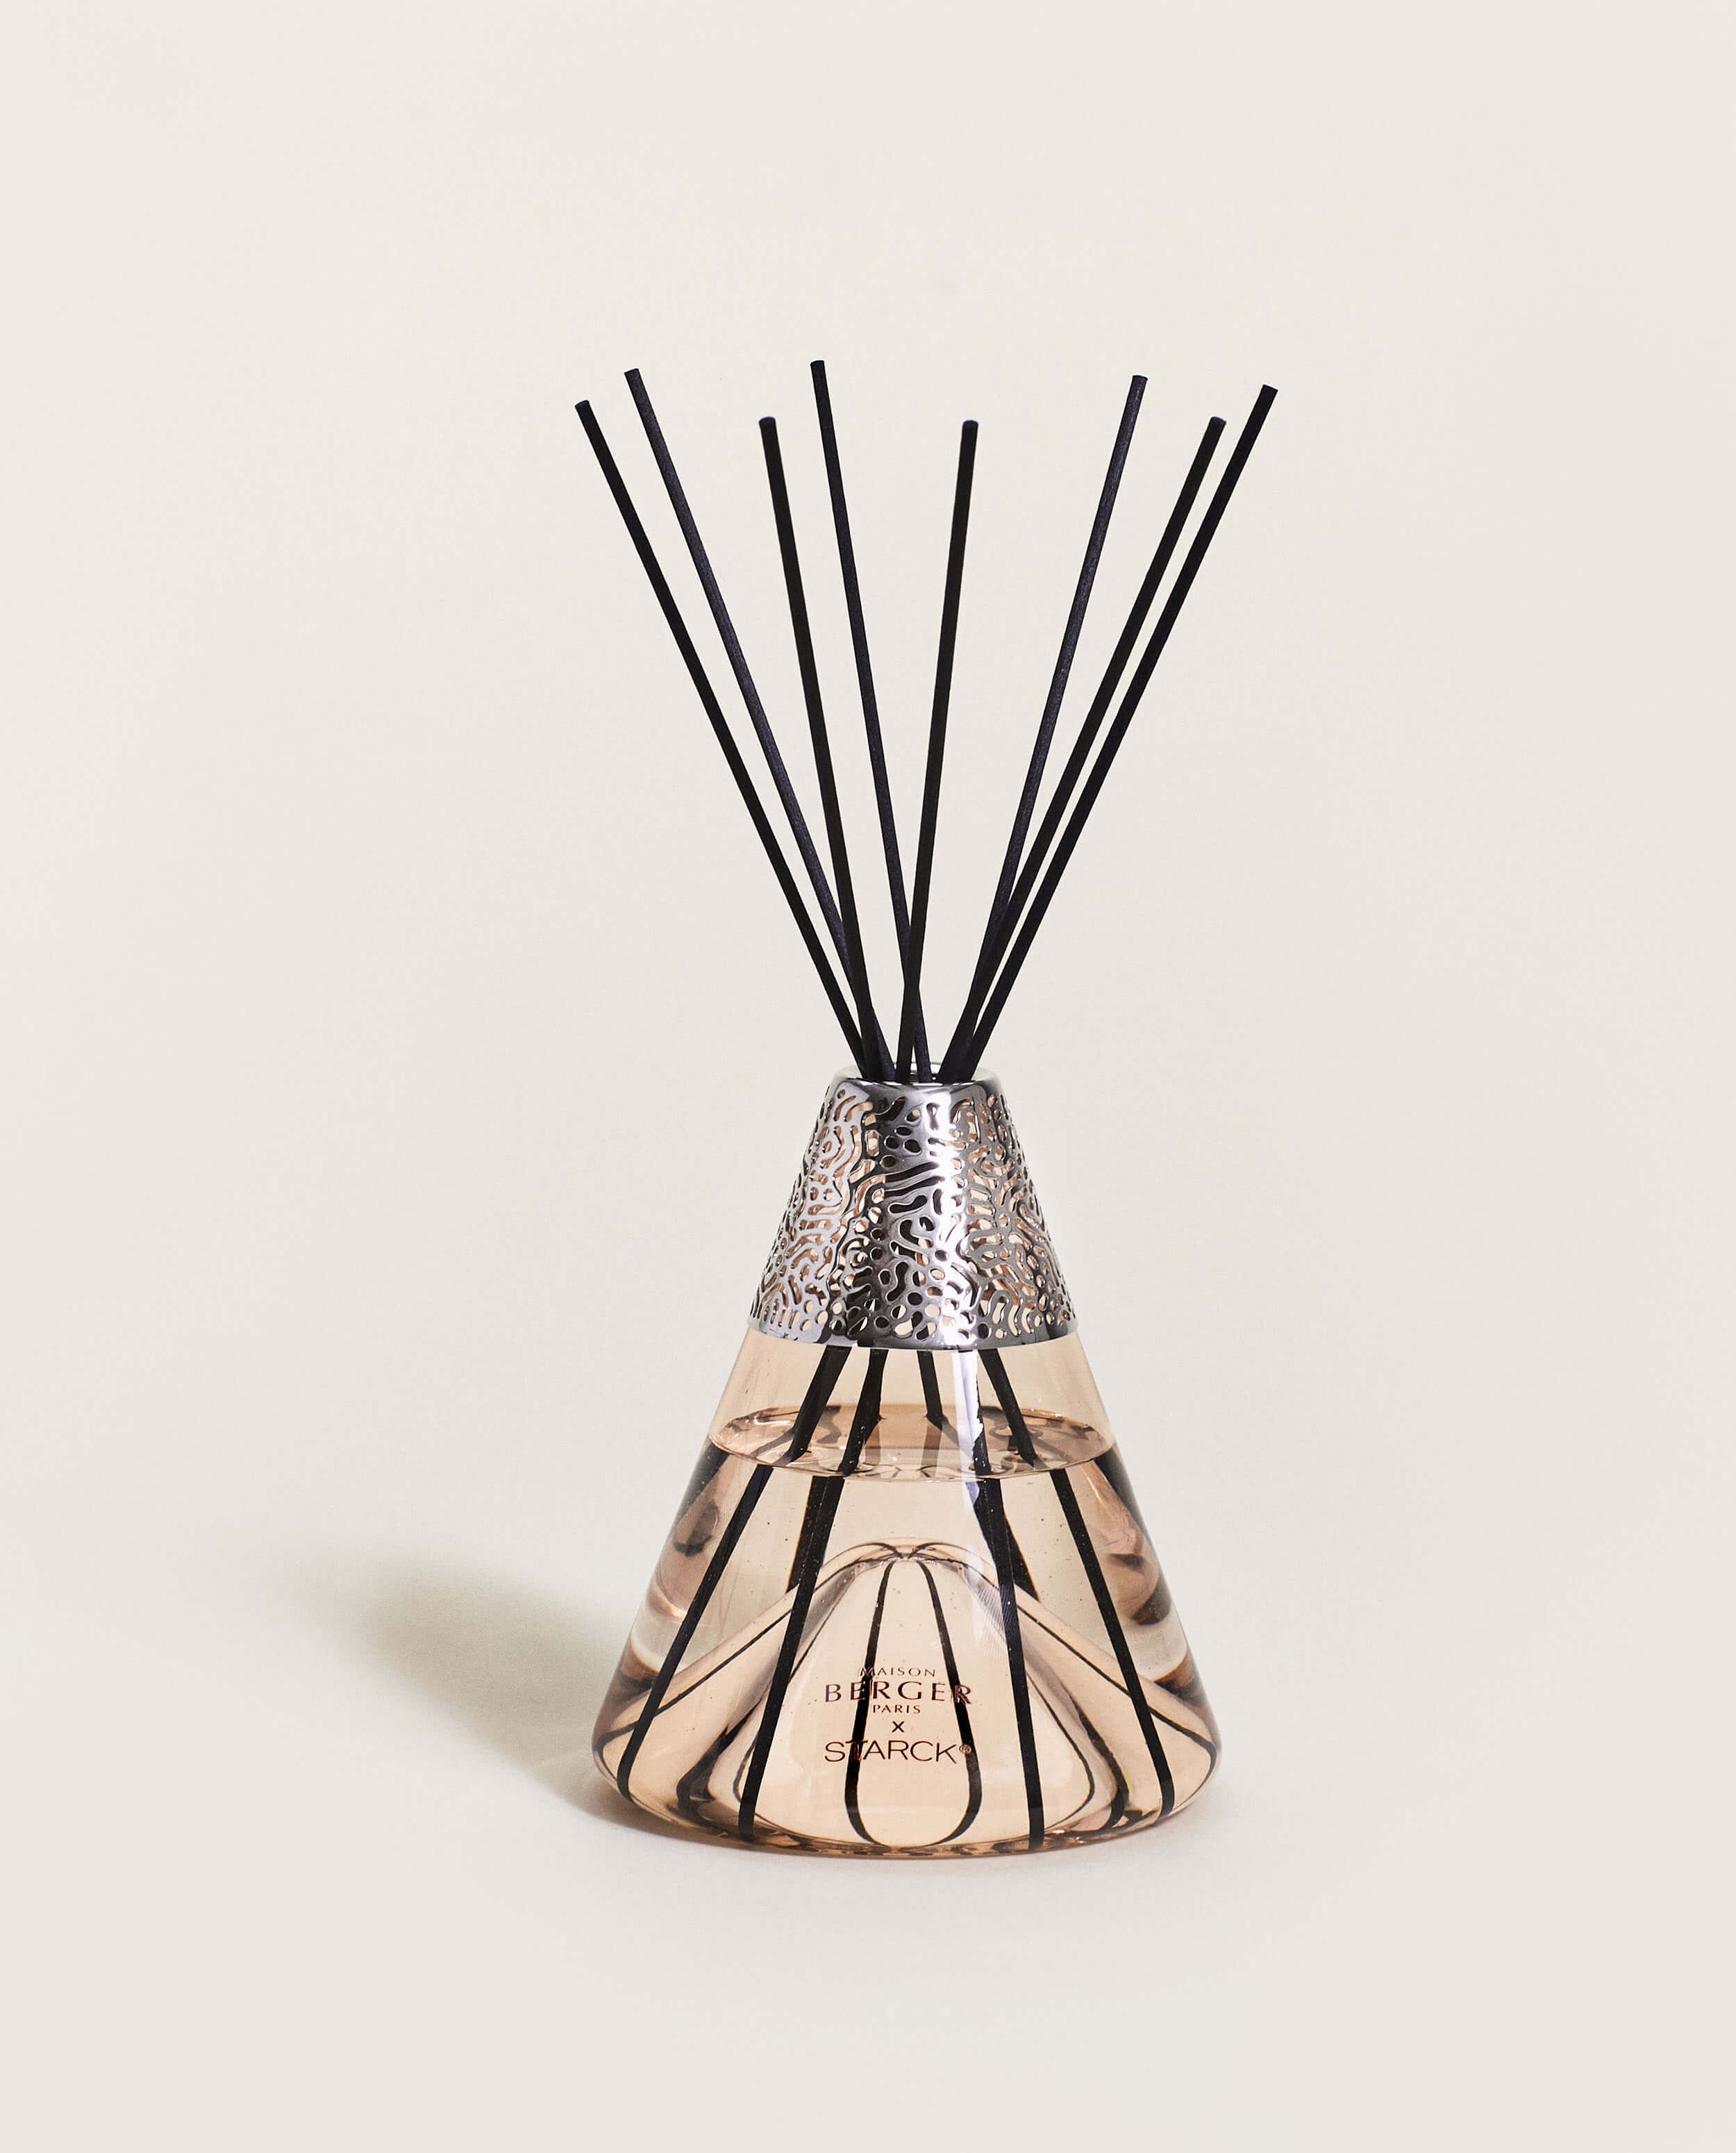 Starck Pink Reed Diffuser Gift Set with Peau de Soie